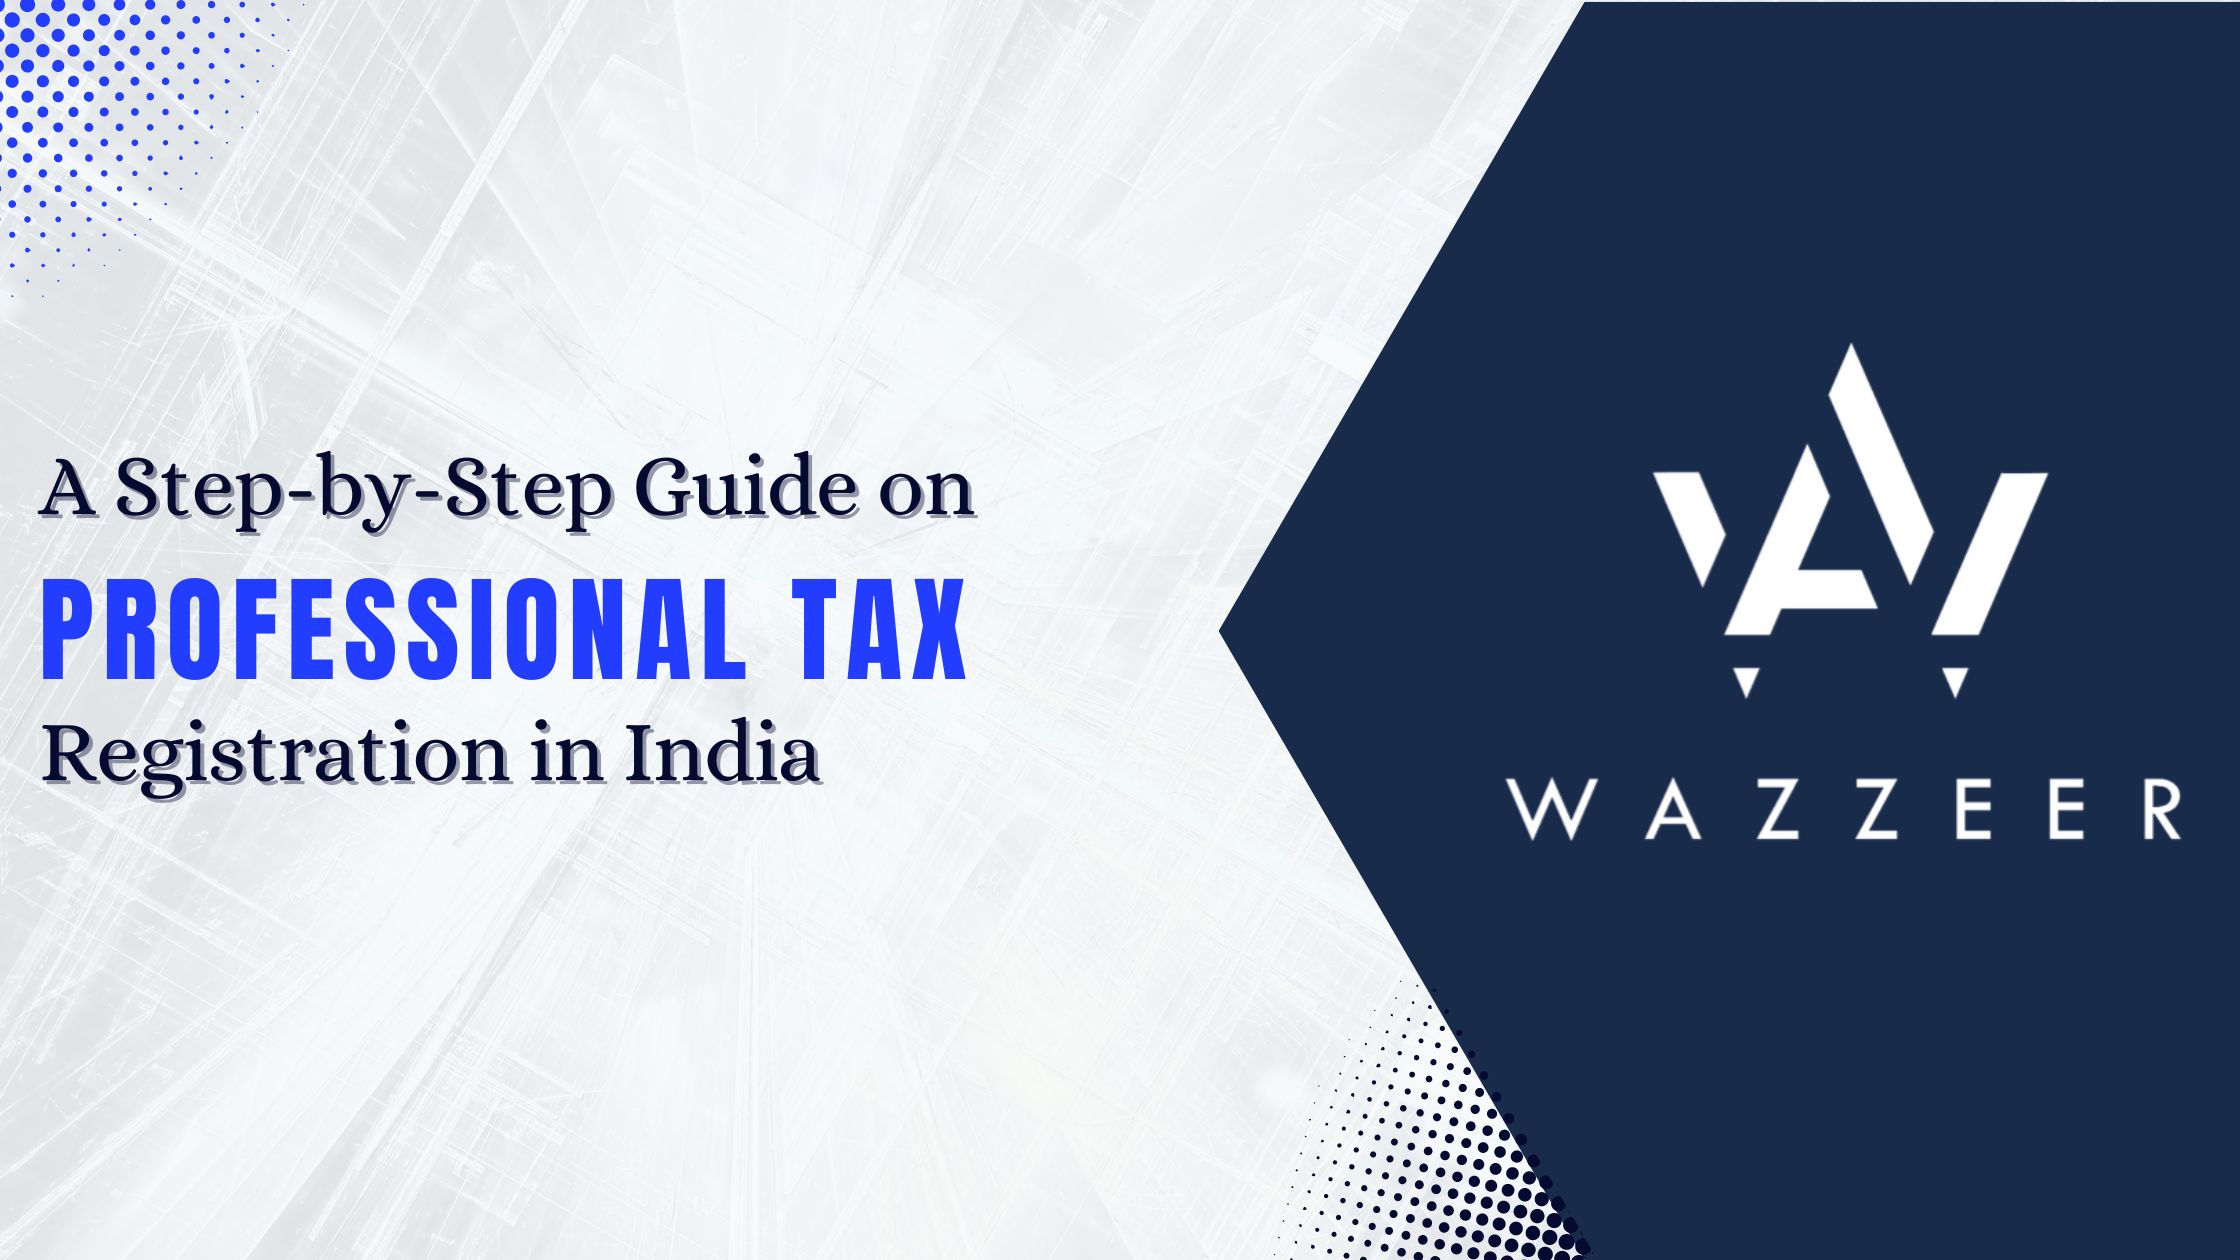 A Step-by-Step Guide on Professional Tax Registration in India